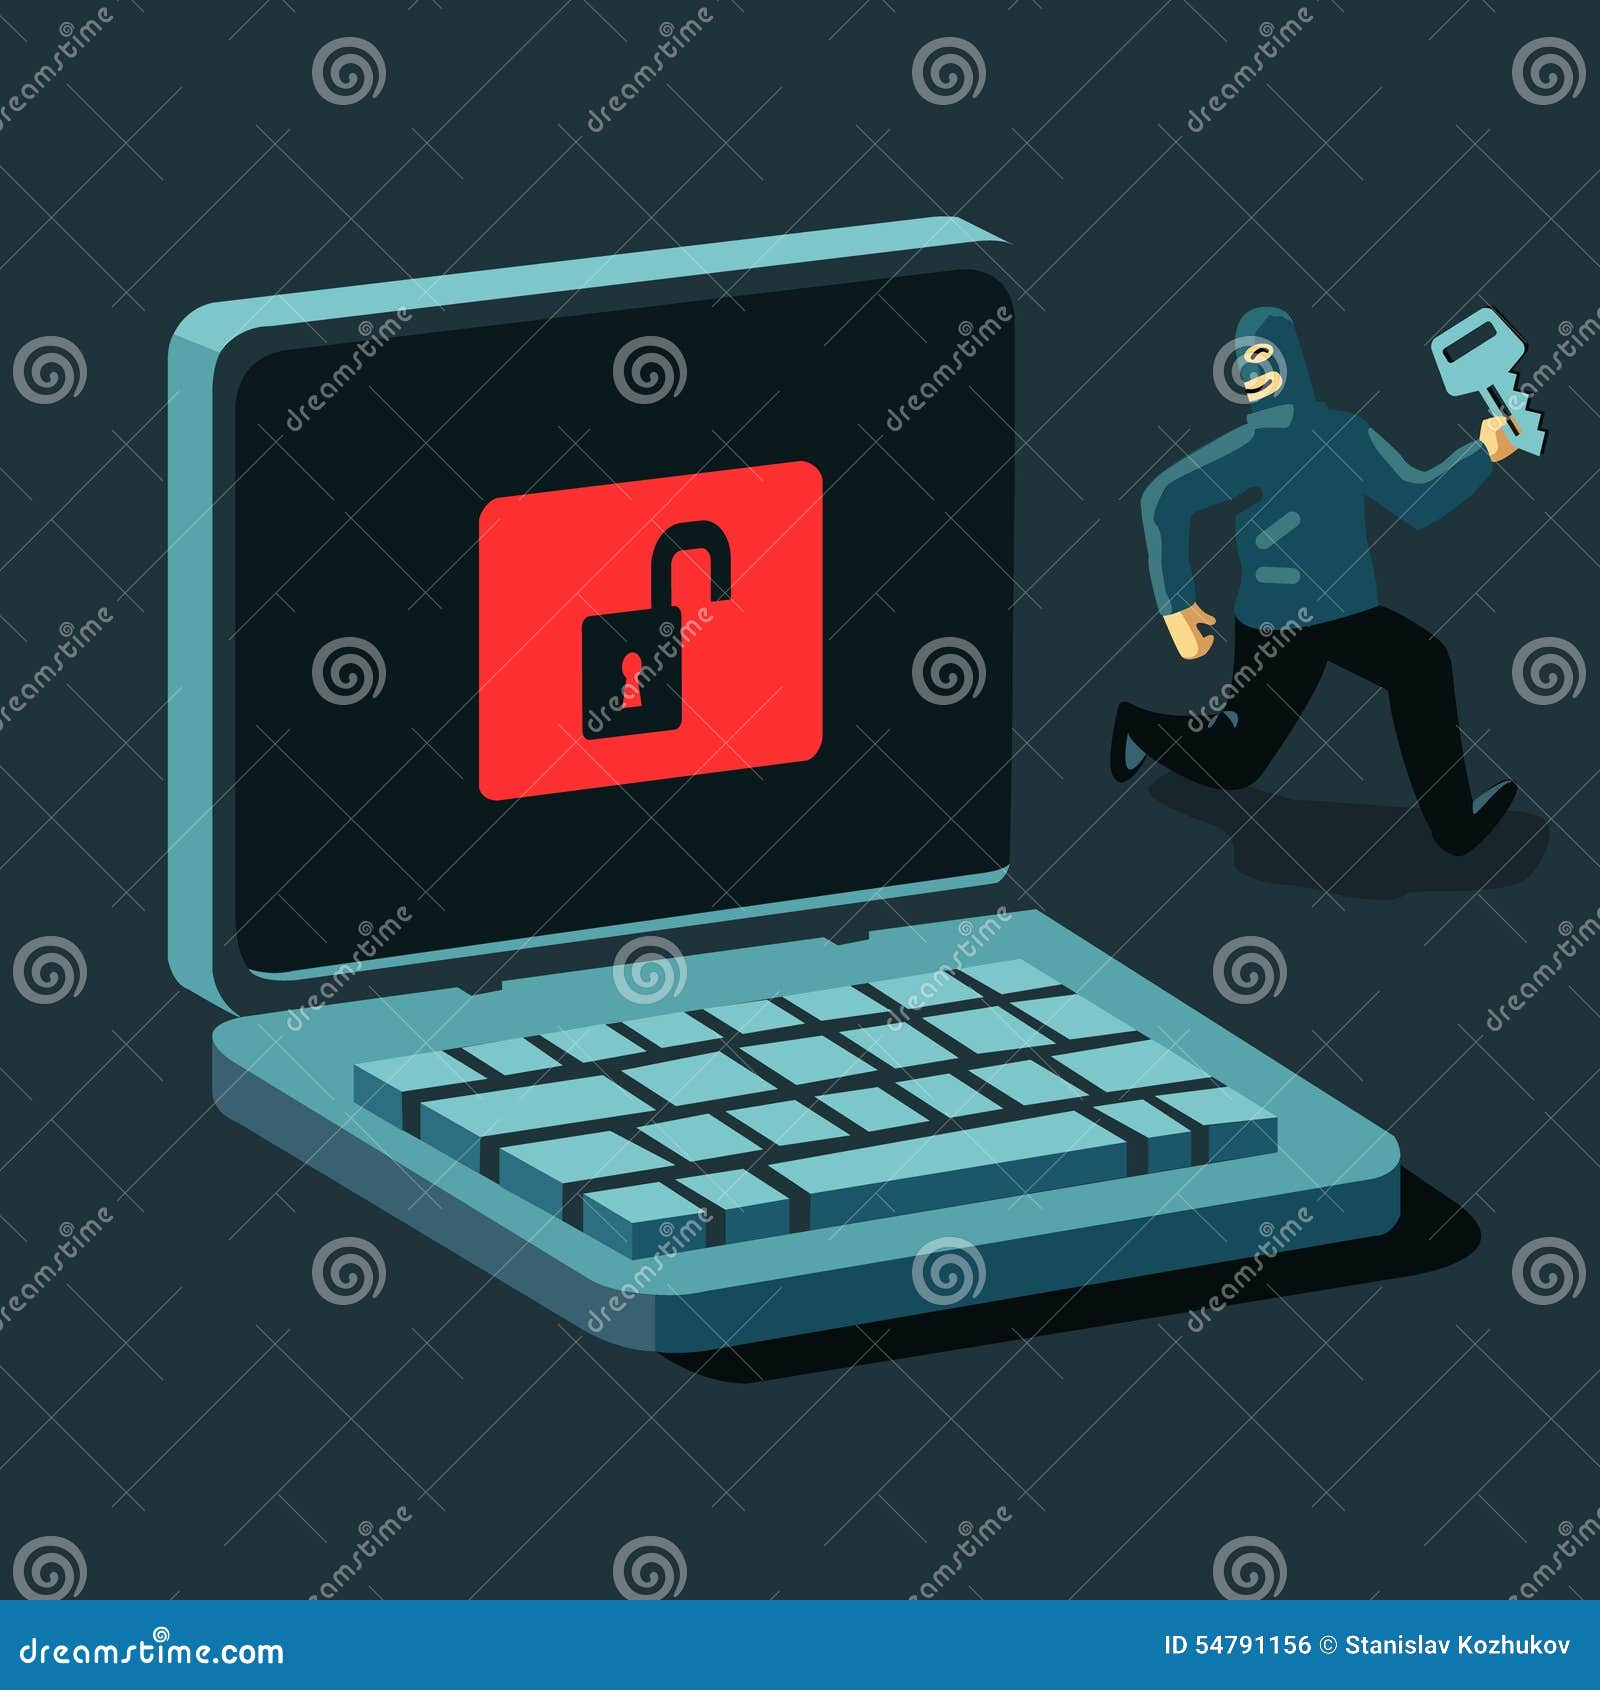 computer hacking clipart - photo #25